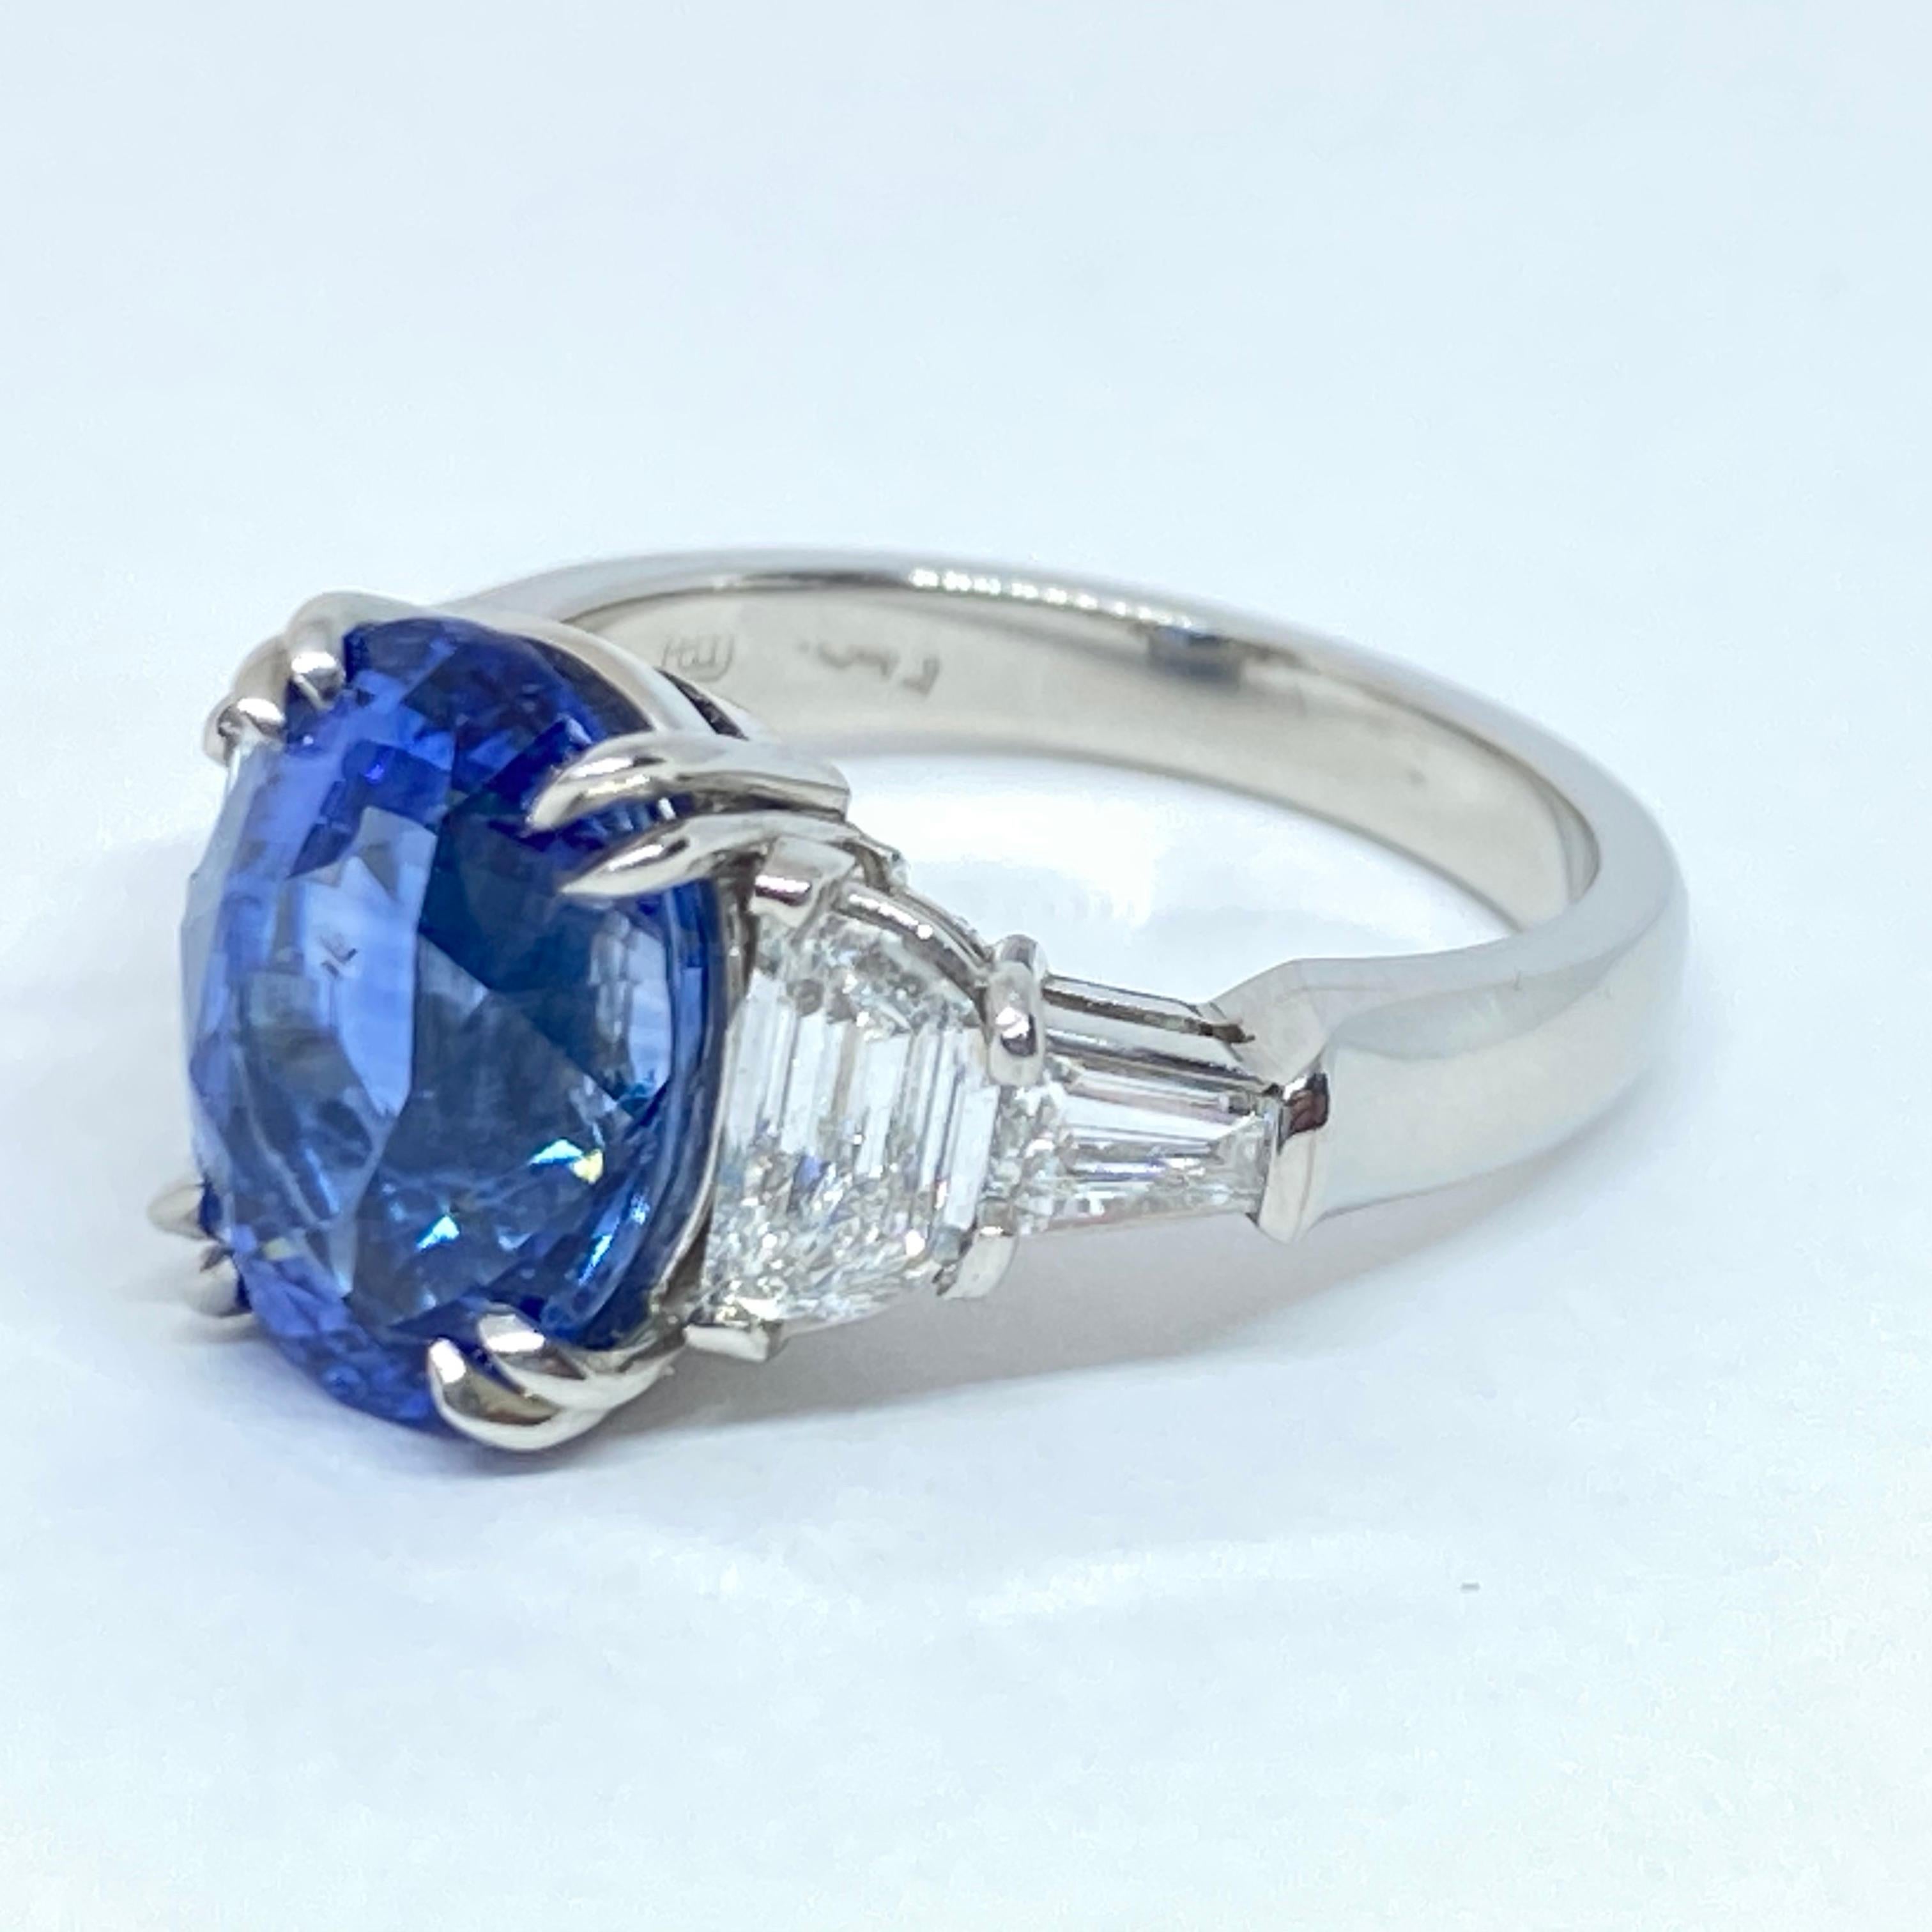 This is a gorgeous natural cornflower blue sapphire and diamond ring designed in a handmade custom solid platinum mounting. The center is a fancy oval cut sapphire measuring 12.17 X 9.53 X 7.88mm with a weight of 7.11 carats! The sapphire is a